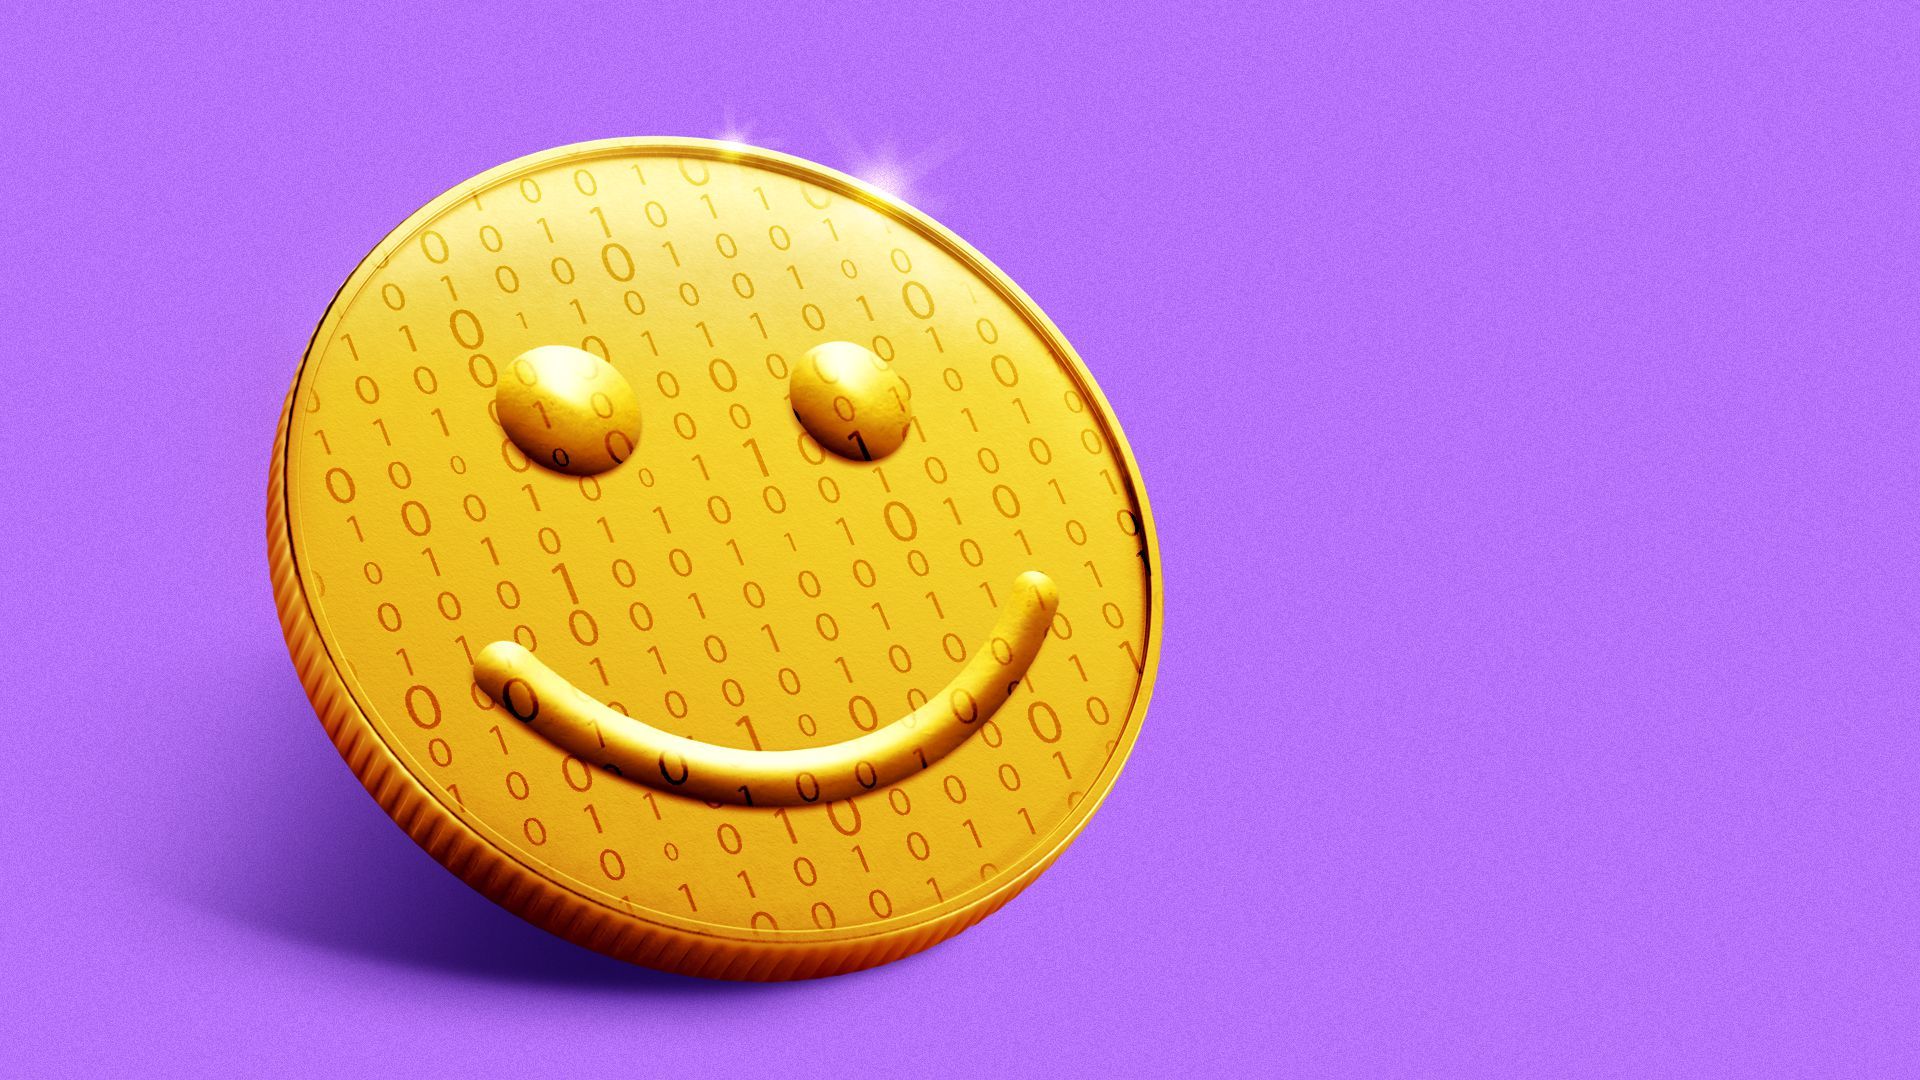 Illustration of a smiley face gold coin with binary code overlay 